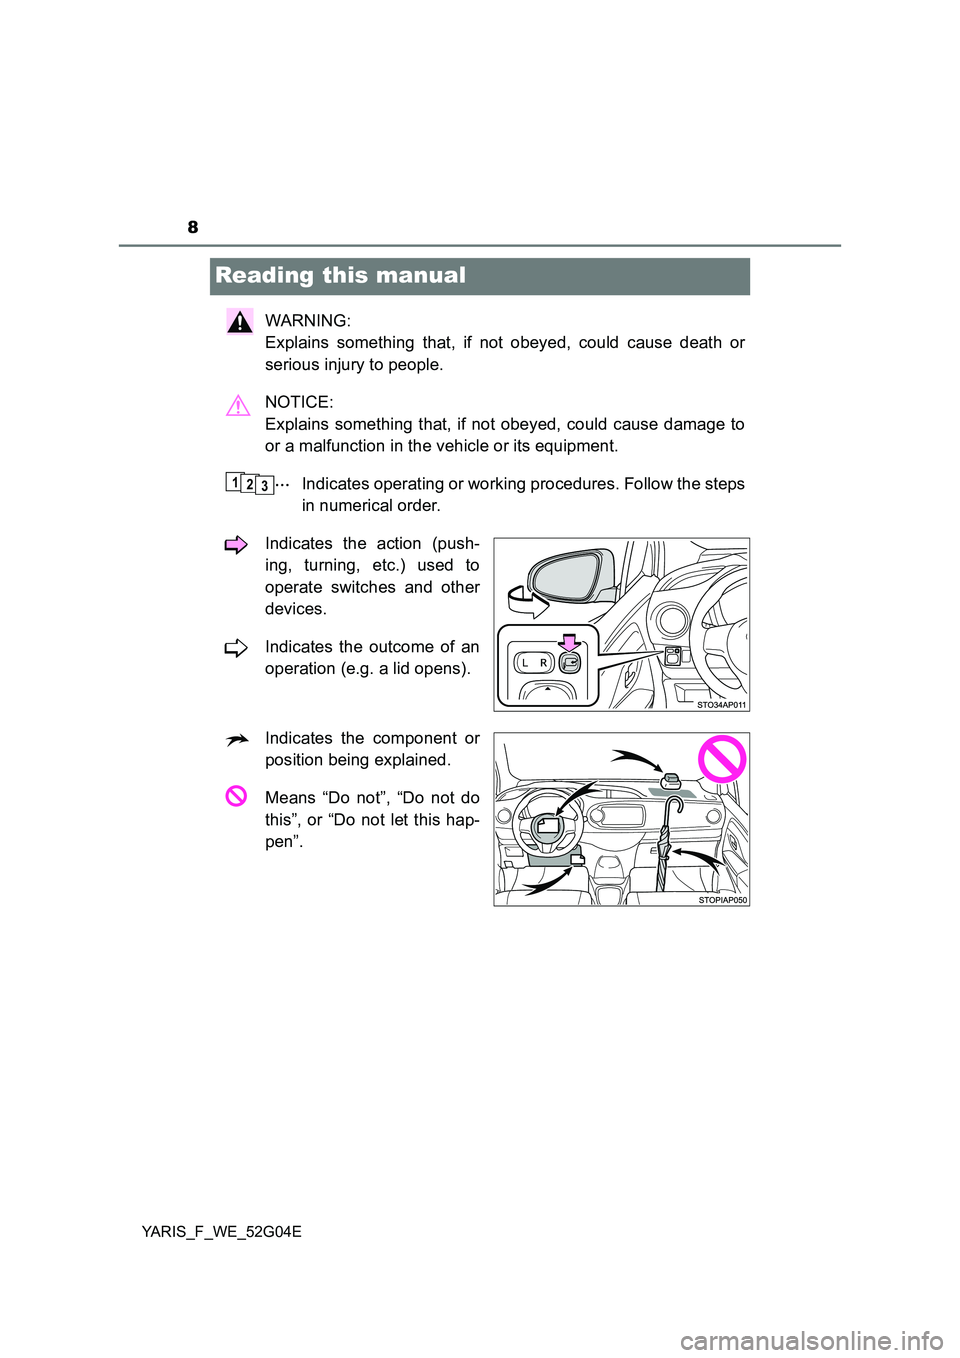 TOYOTA YARIS HATCHBACK 2015  Owners Manual 8
YARIS_F_WE_52G04E
Reading this manual
WARNING:  
Explains something that, if not obeyed, could cause death or 
serious injury to people. 
NOTICE:  
Explains something that, if not obeyed, could caus